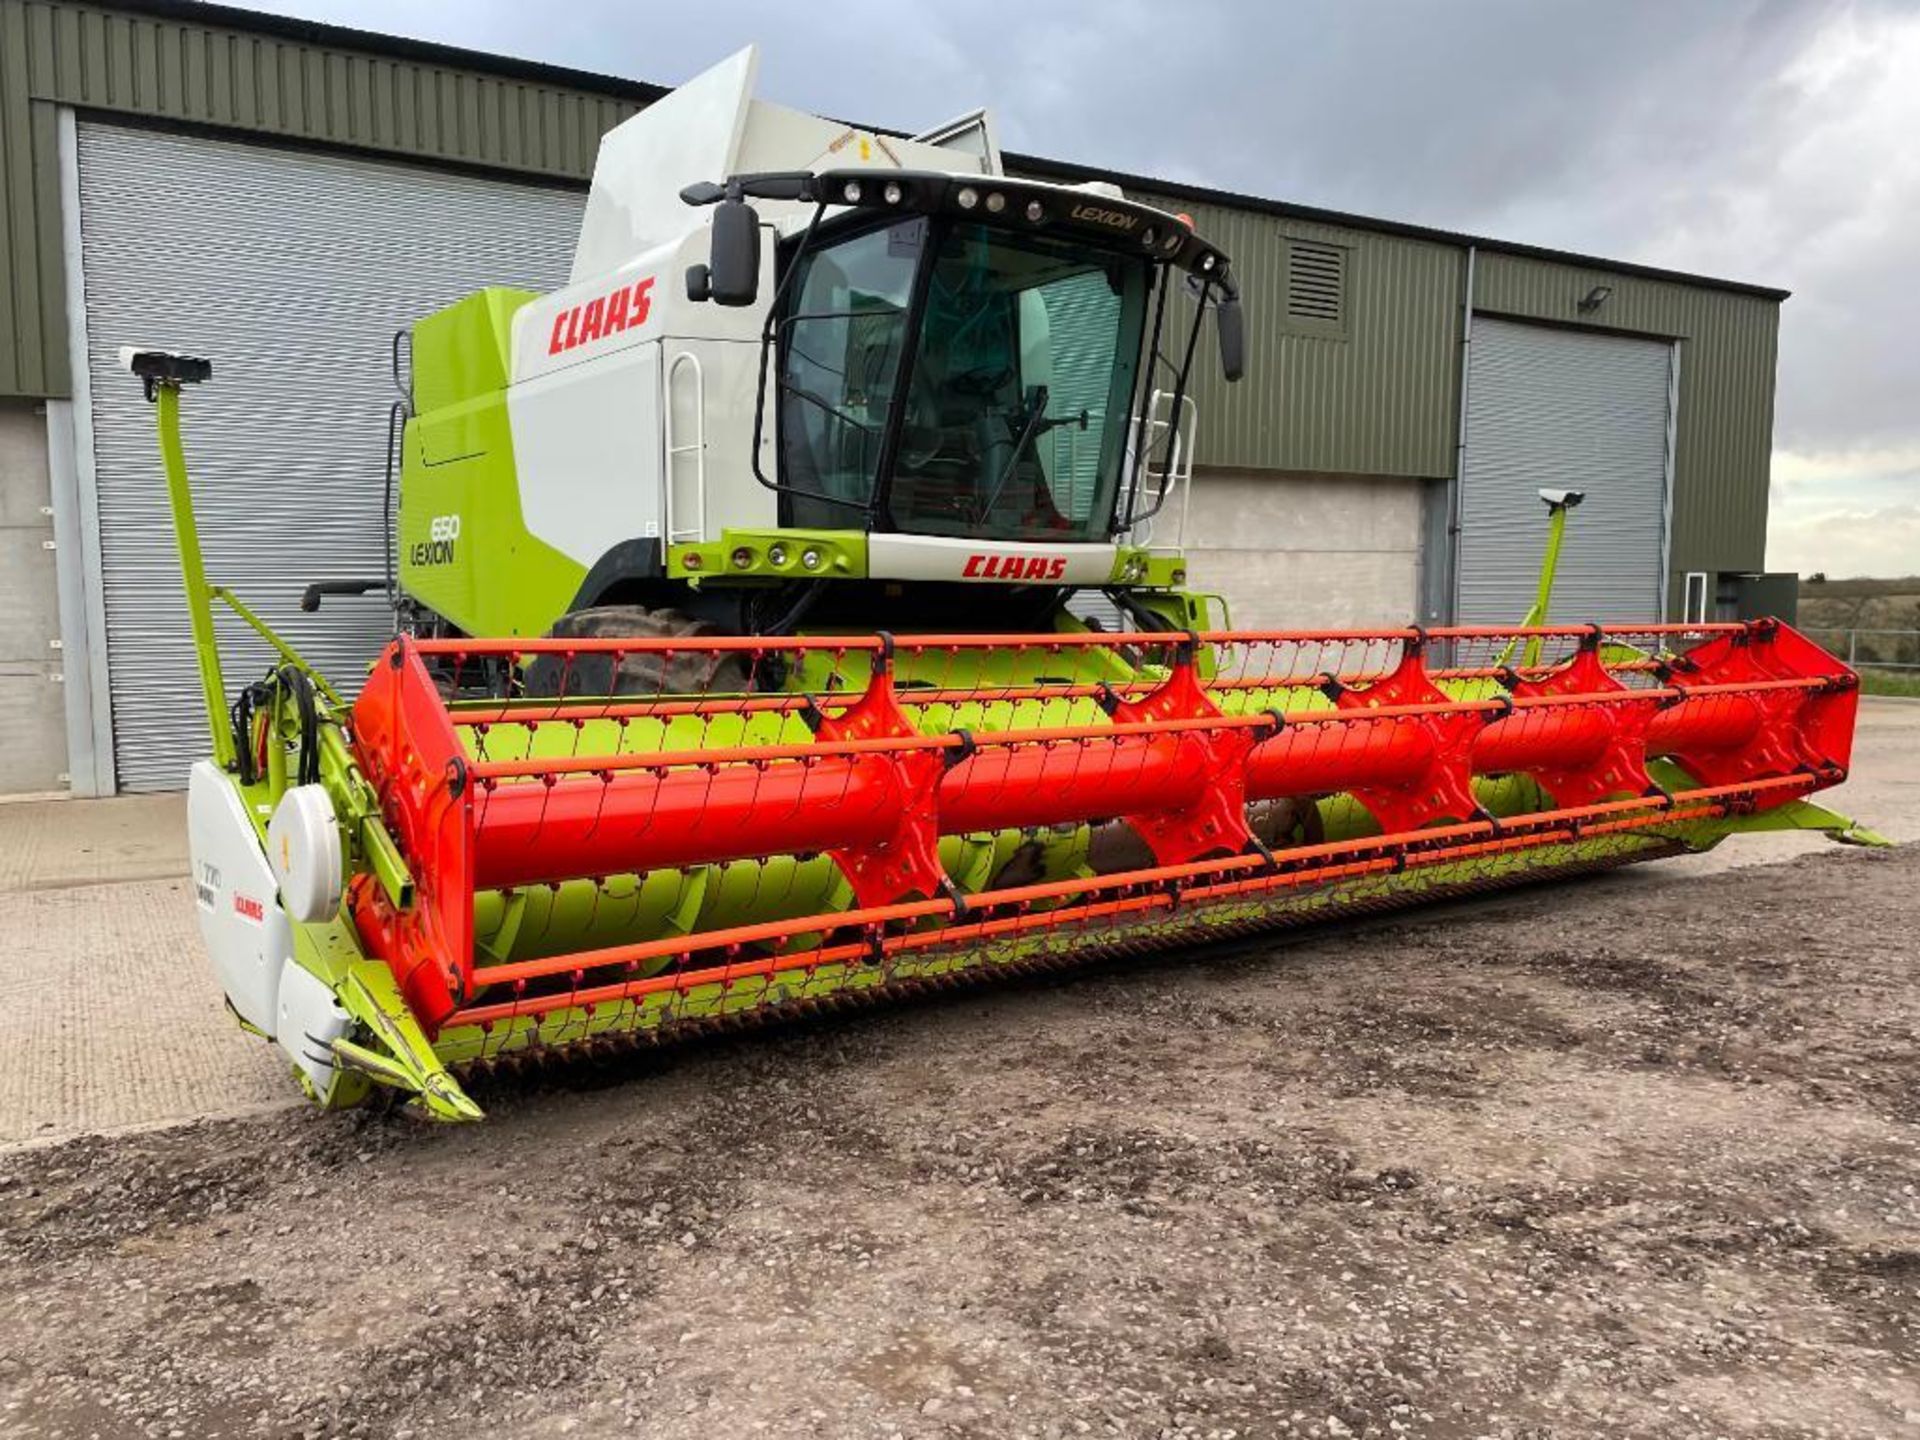 2015 Claas Lexion 650 combine harvester, telematics ready with straw chopper and rear tow hitch and